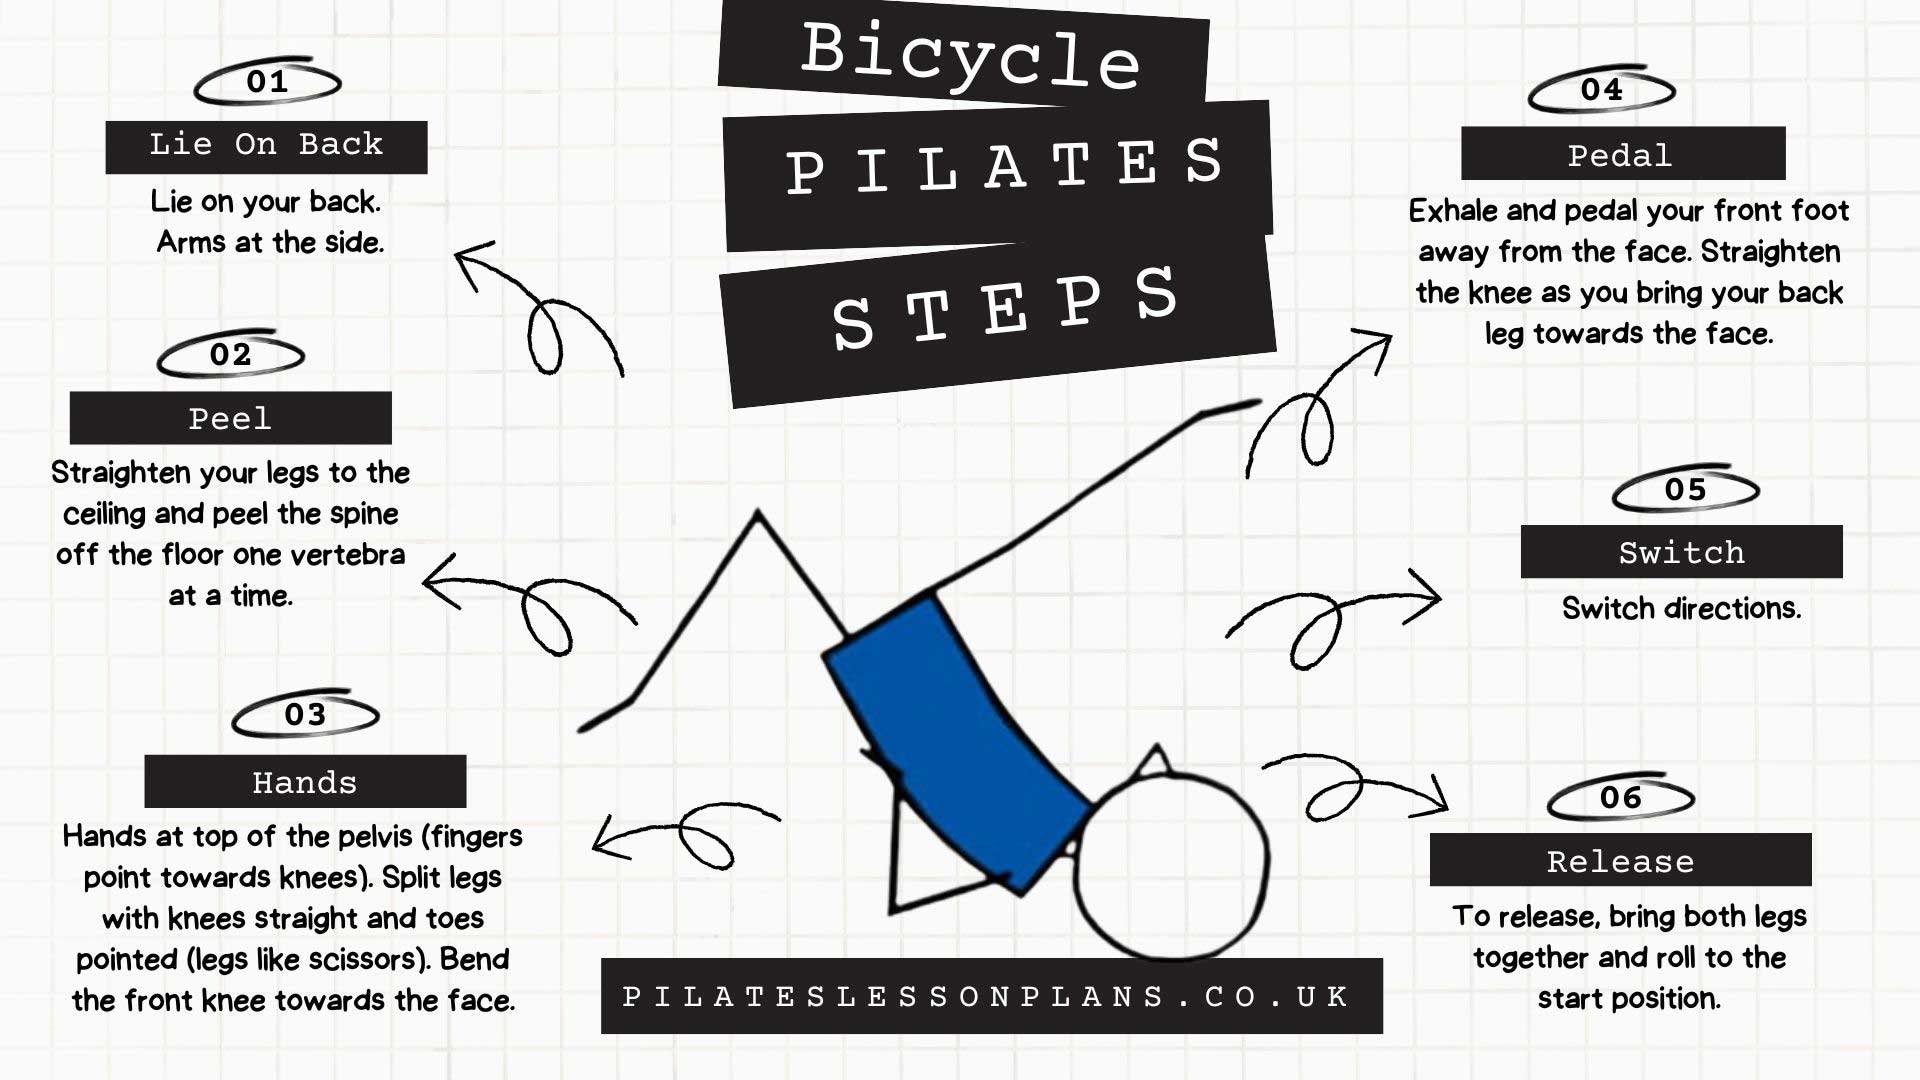 Bicycle Pilates Steps Infographic